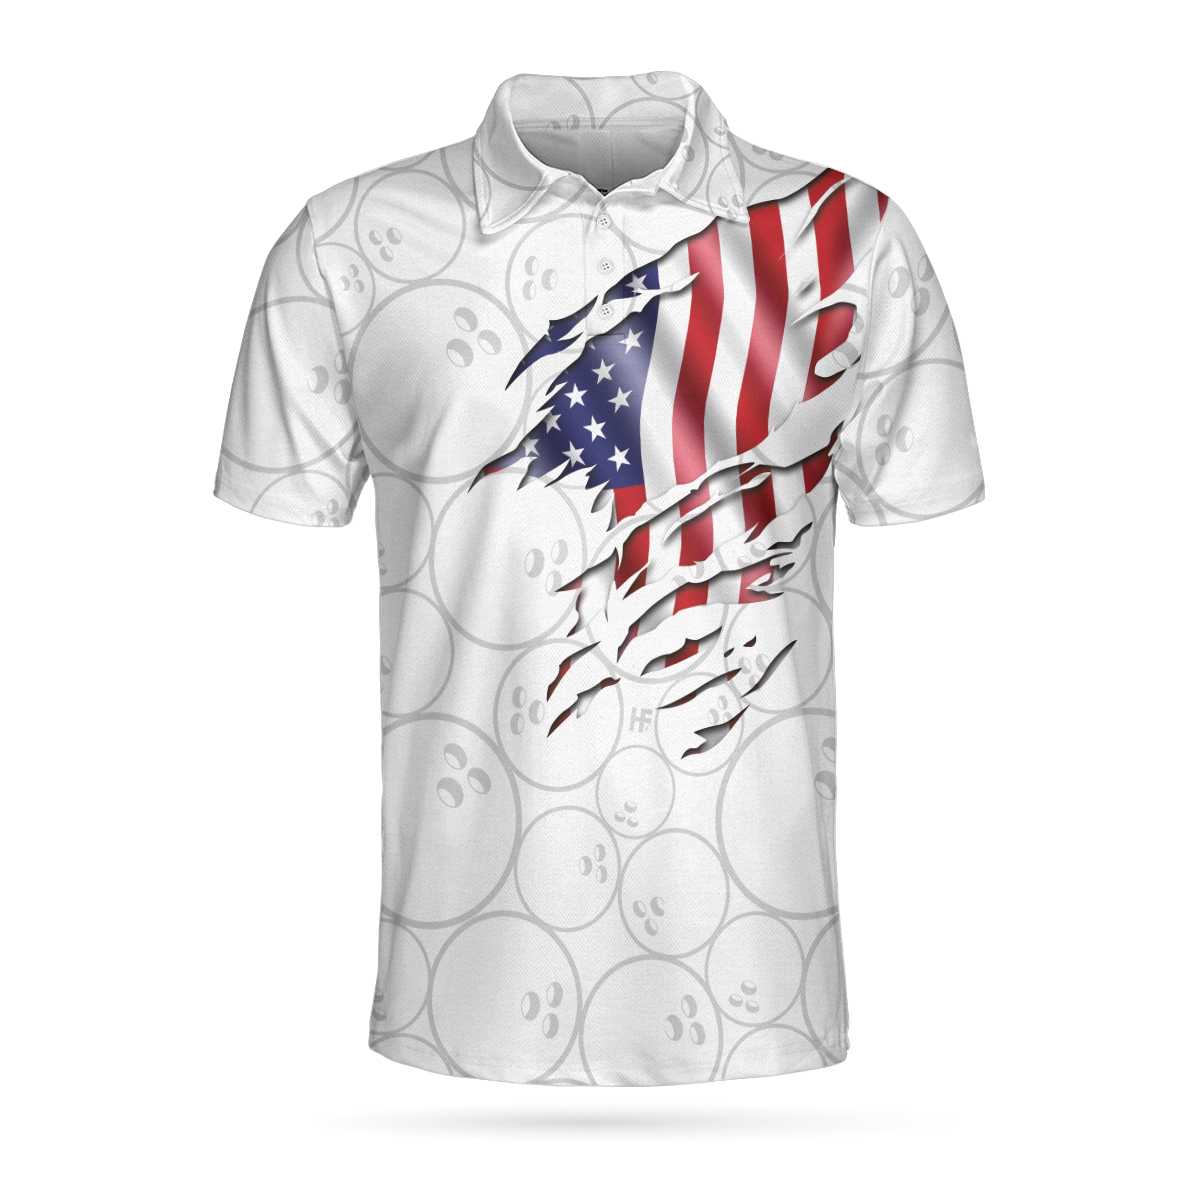 Bowling American Flag White Background Polo Shirt/ American Flag Polo Shirt/ Best Bowling Shirt For Men Coolspod